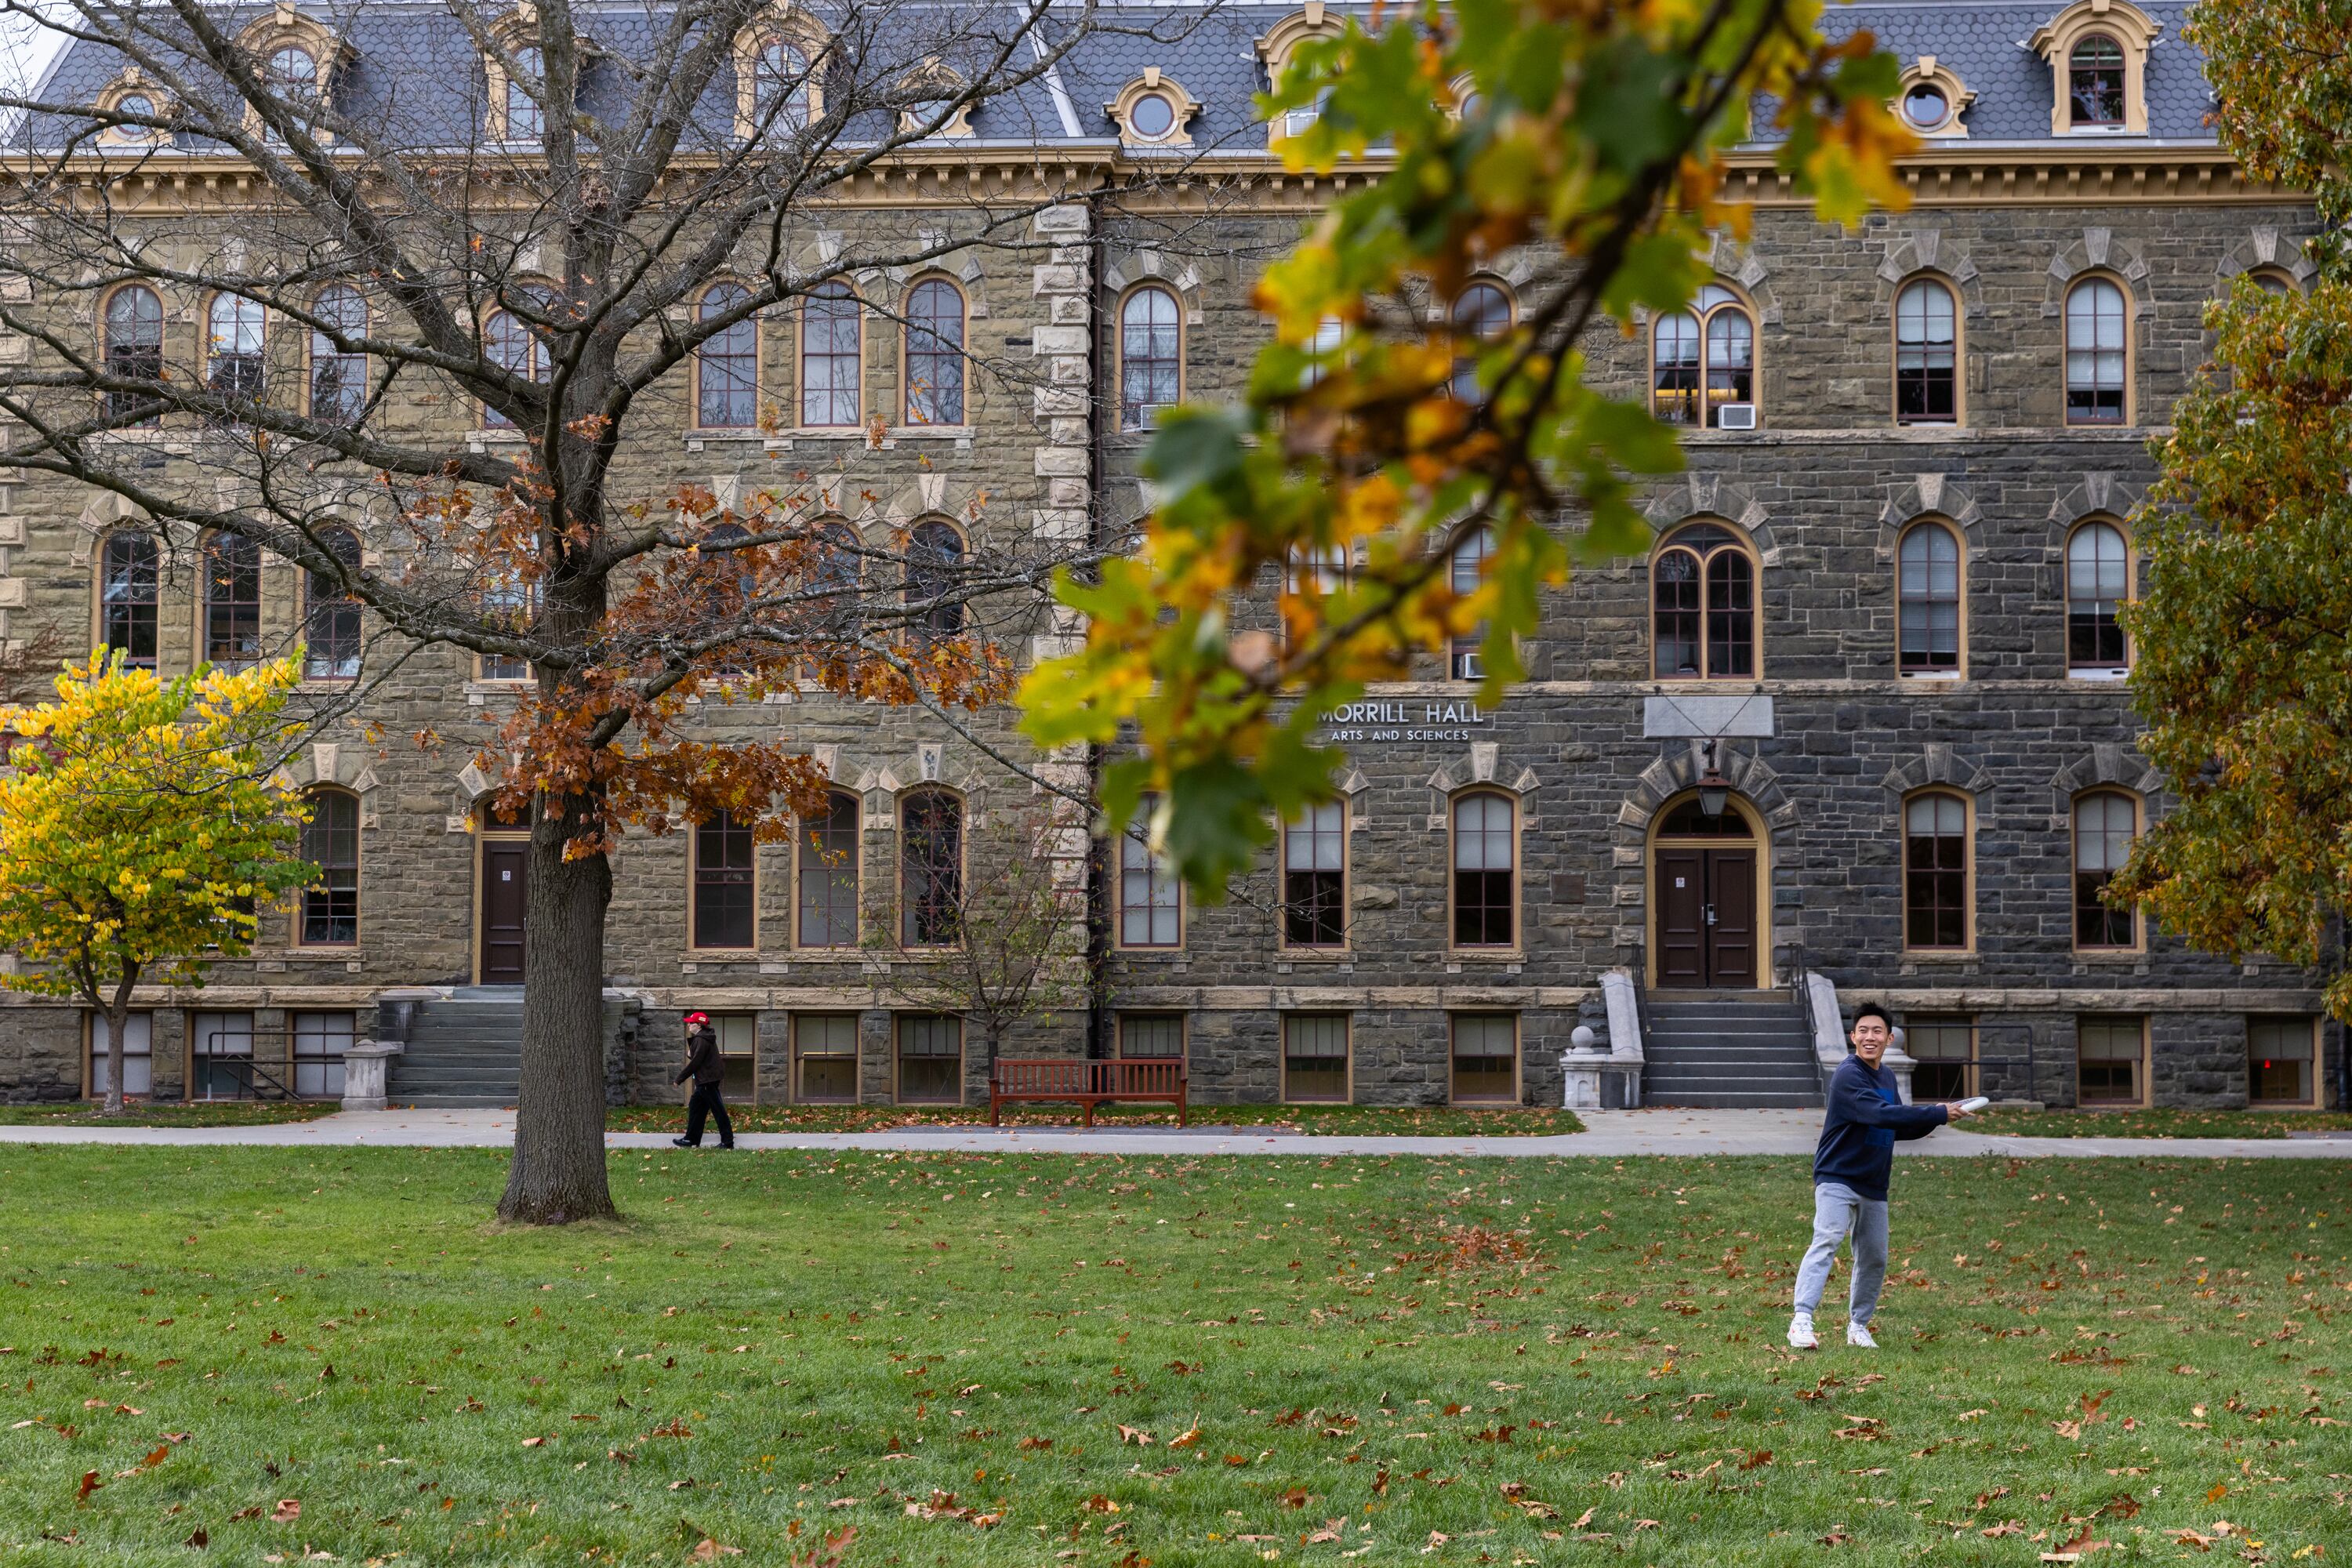 A student prepares to throw a frisbee while standing on a large green area in front of a large stone university building.